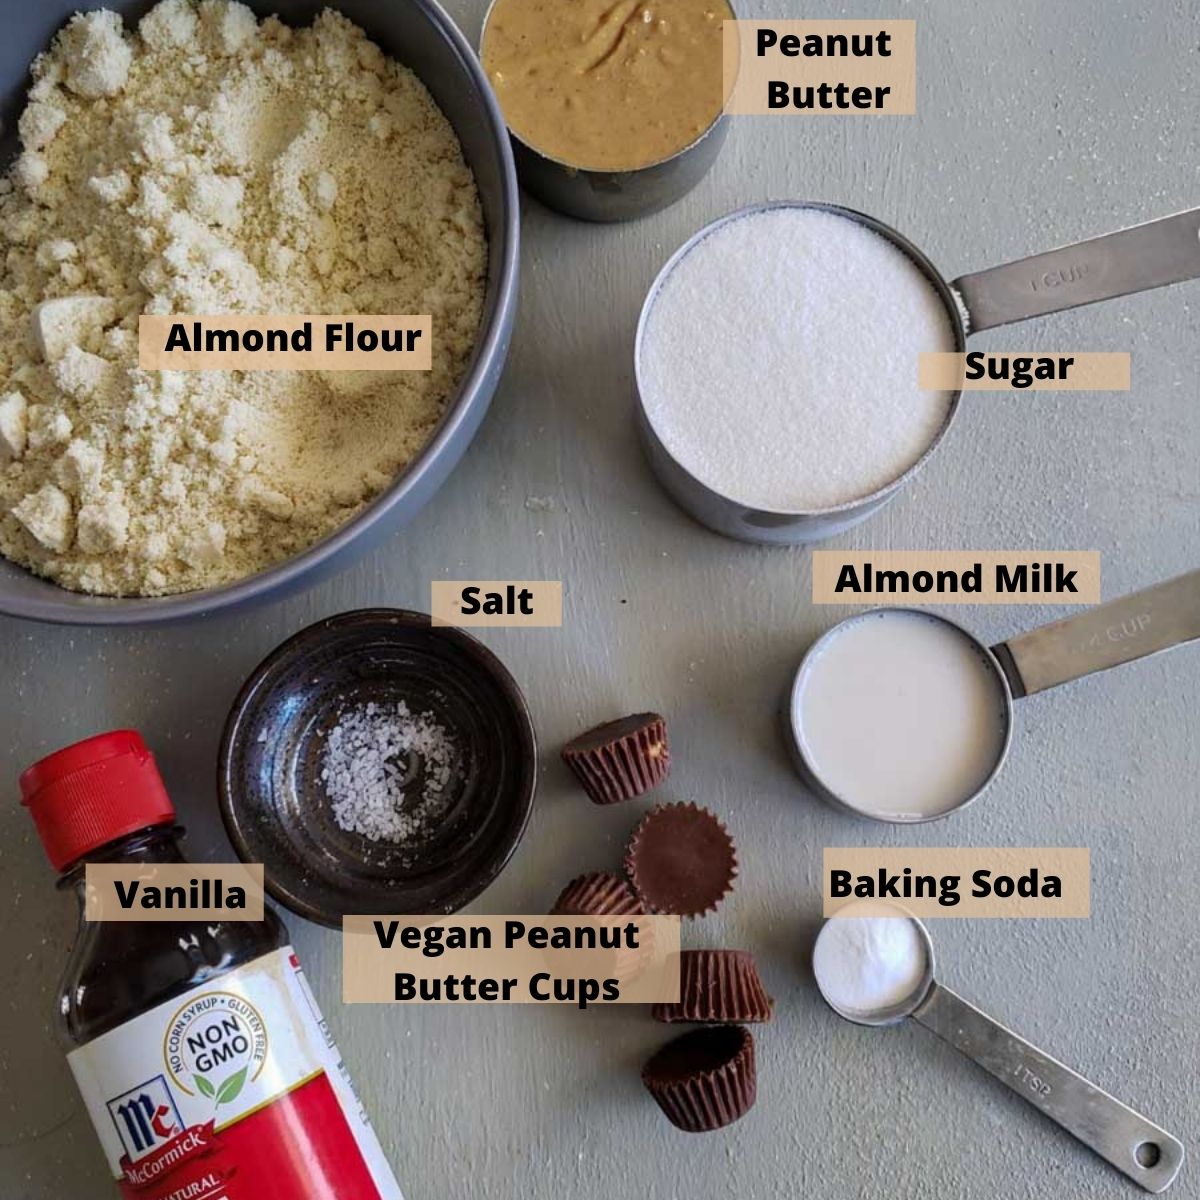 All the ingredients for this recipe on a grey board. Almond Flour, peanut butter, almond milk, sugar, salt, vanilla and baking soda.